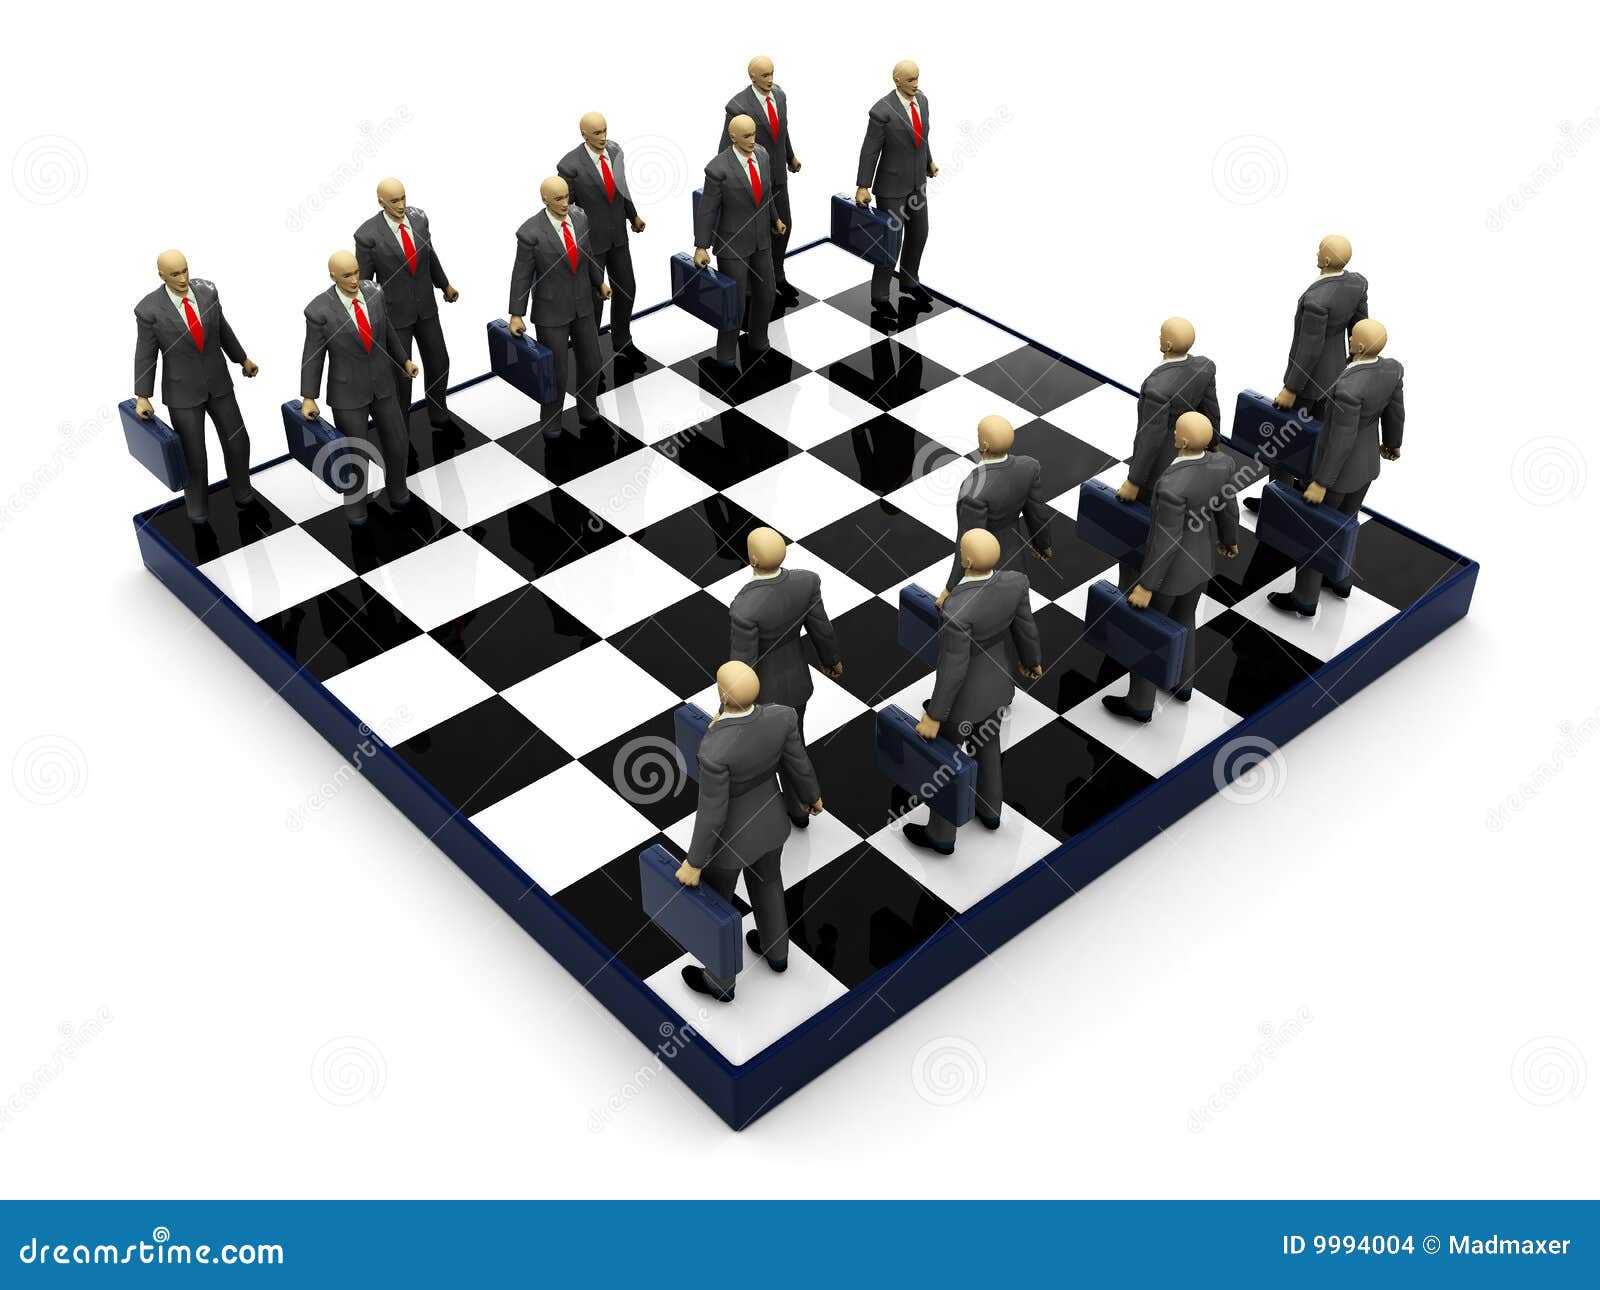 Business Chess Stock Images - Image: 9994004